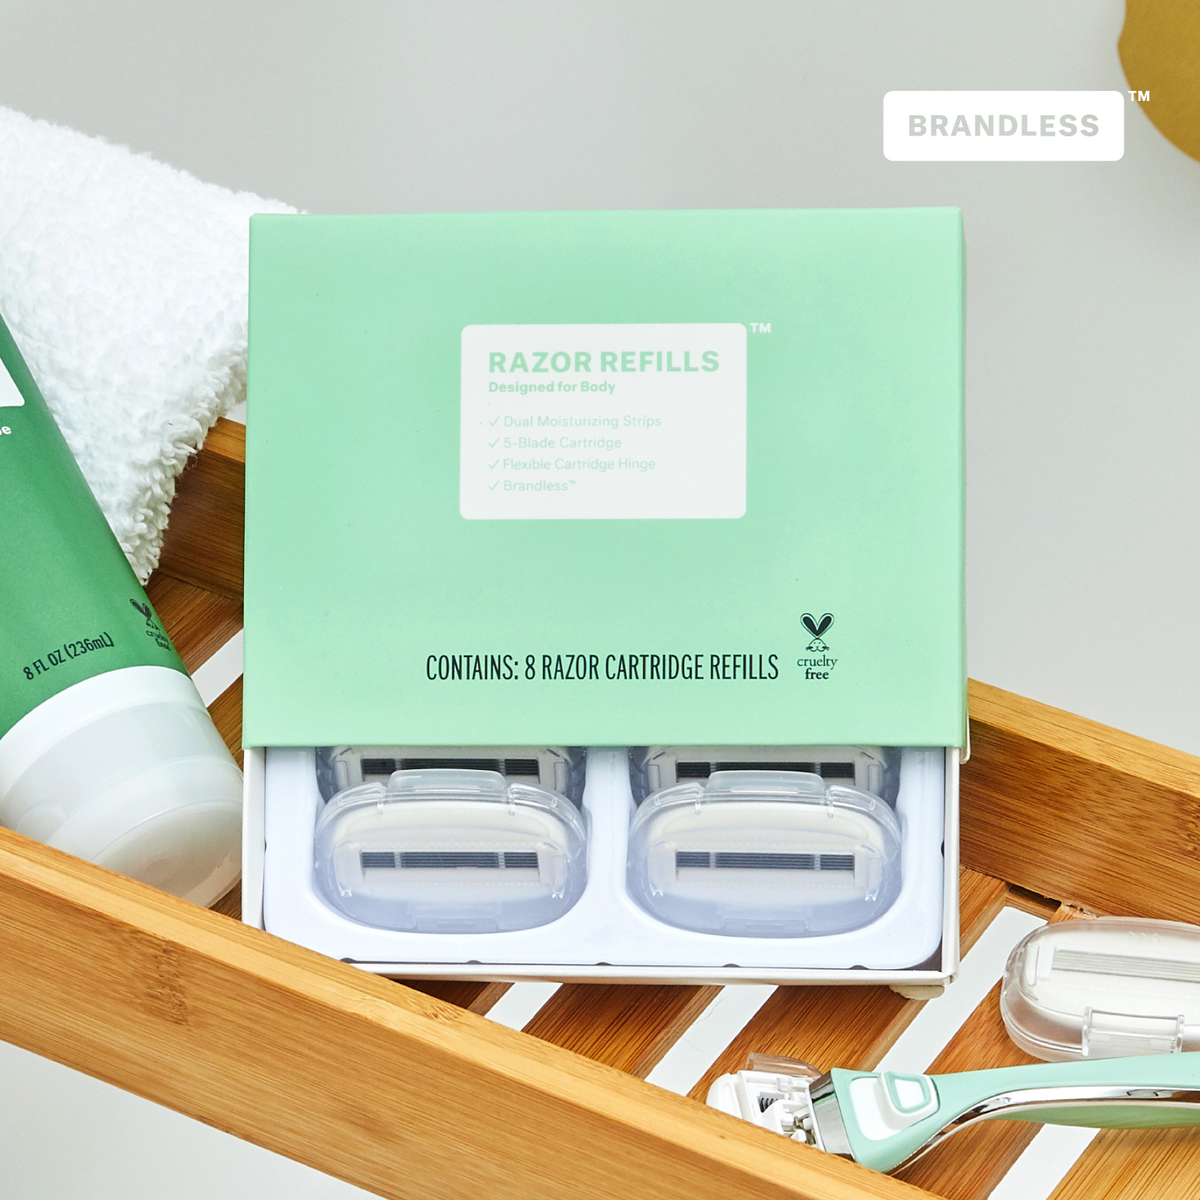 Lifestyle photo, razor refills for body, box slightly open and showing the razor refill cartridges, box sits in a bamboo shower caddy next to a razor for body and a tube of green tea and aloe shave gel. 